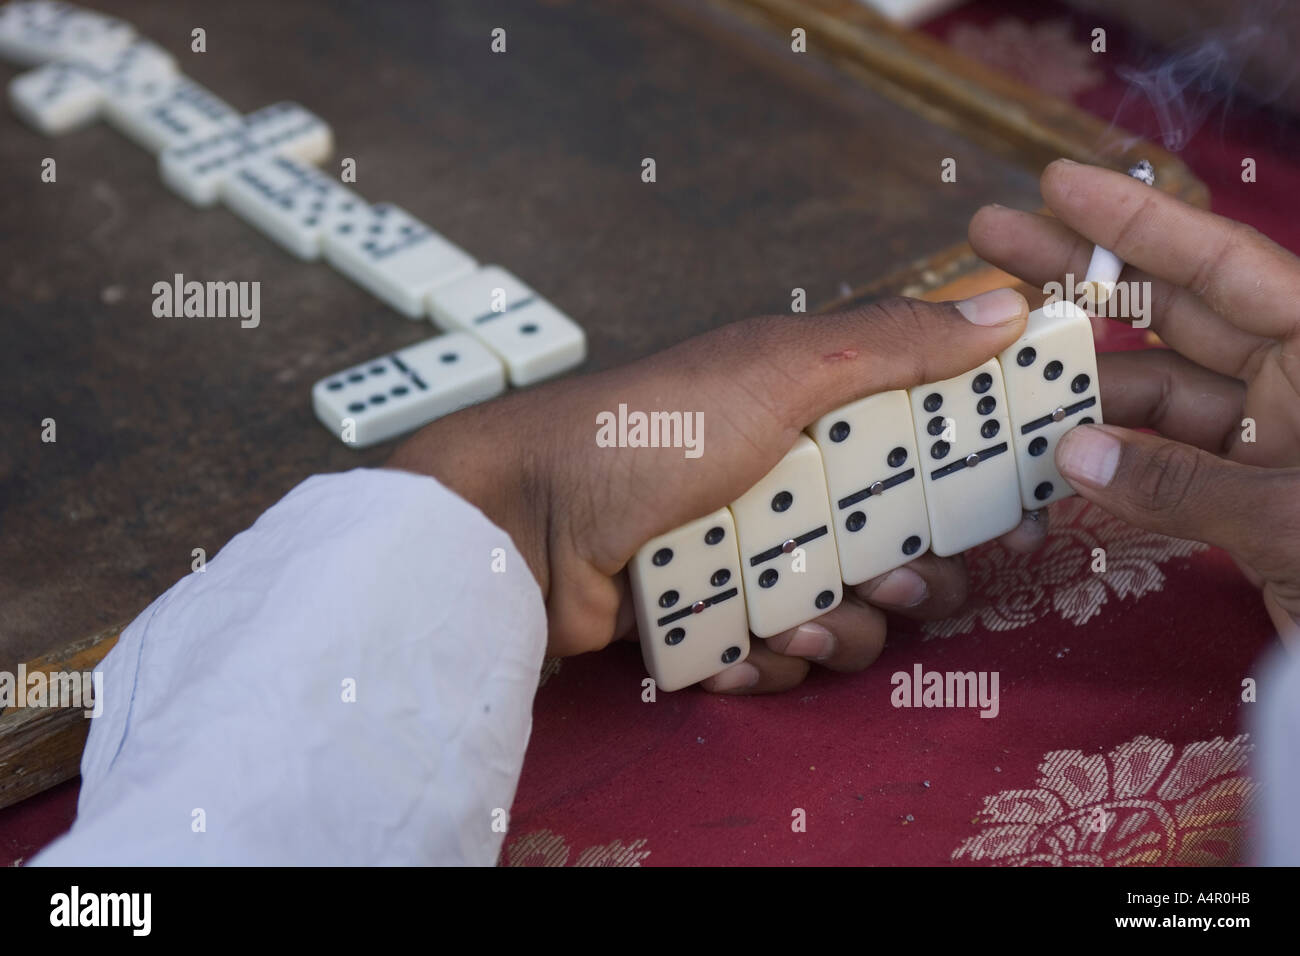 close-up-of-a-person-s-hands-holding-dominos-A4R0HB.jpg